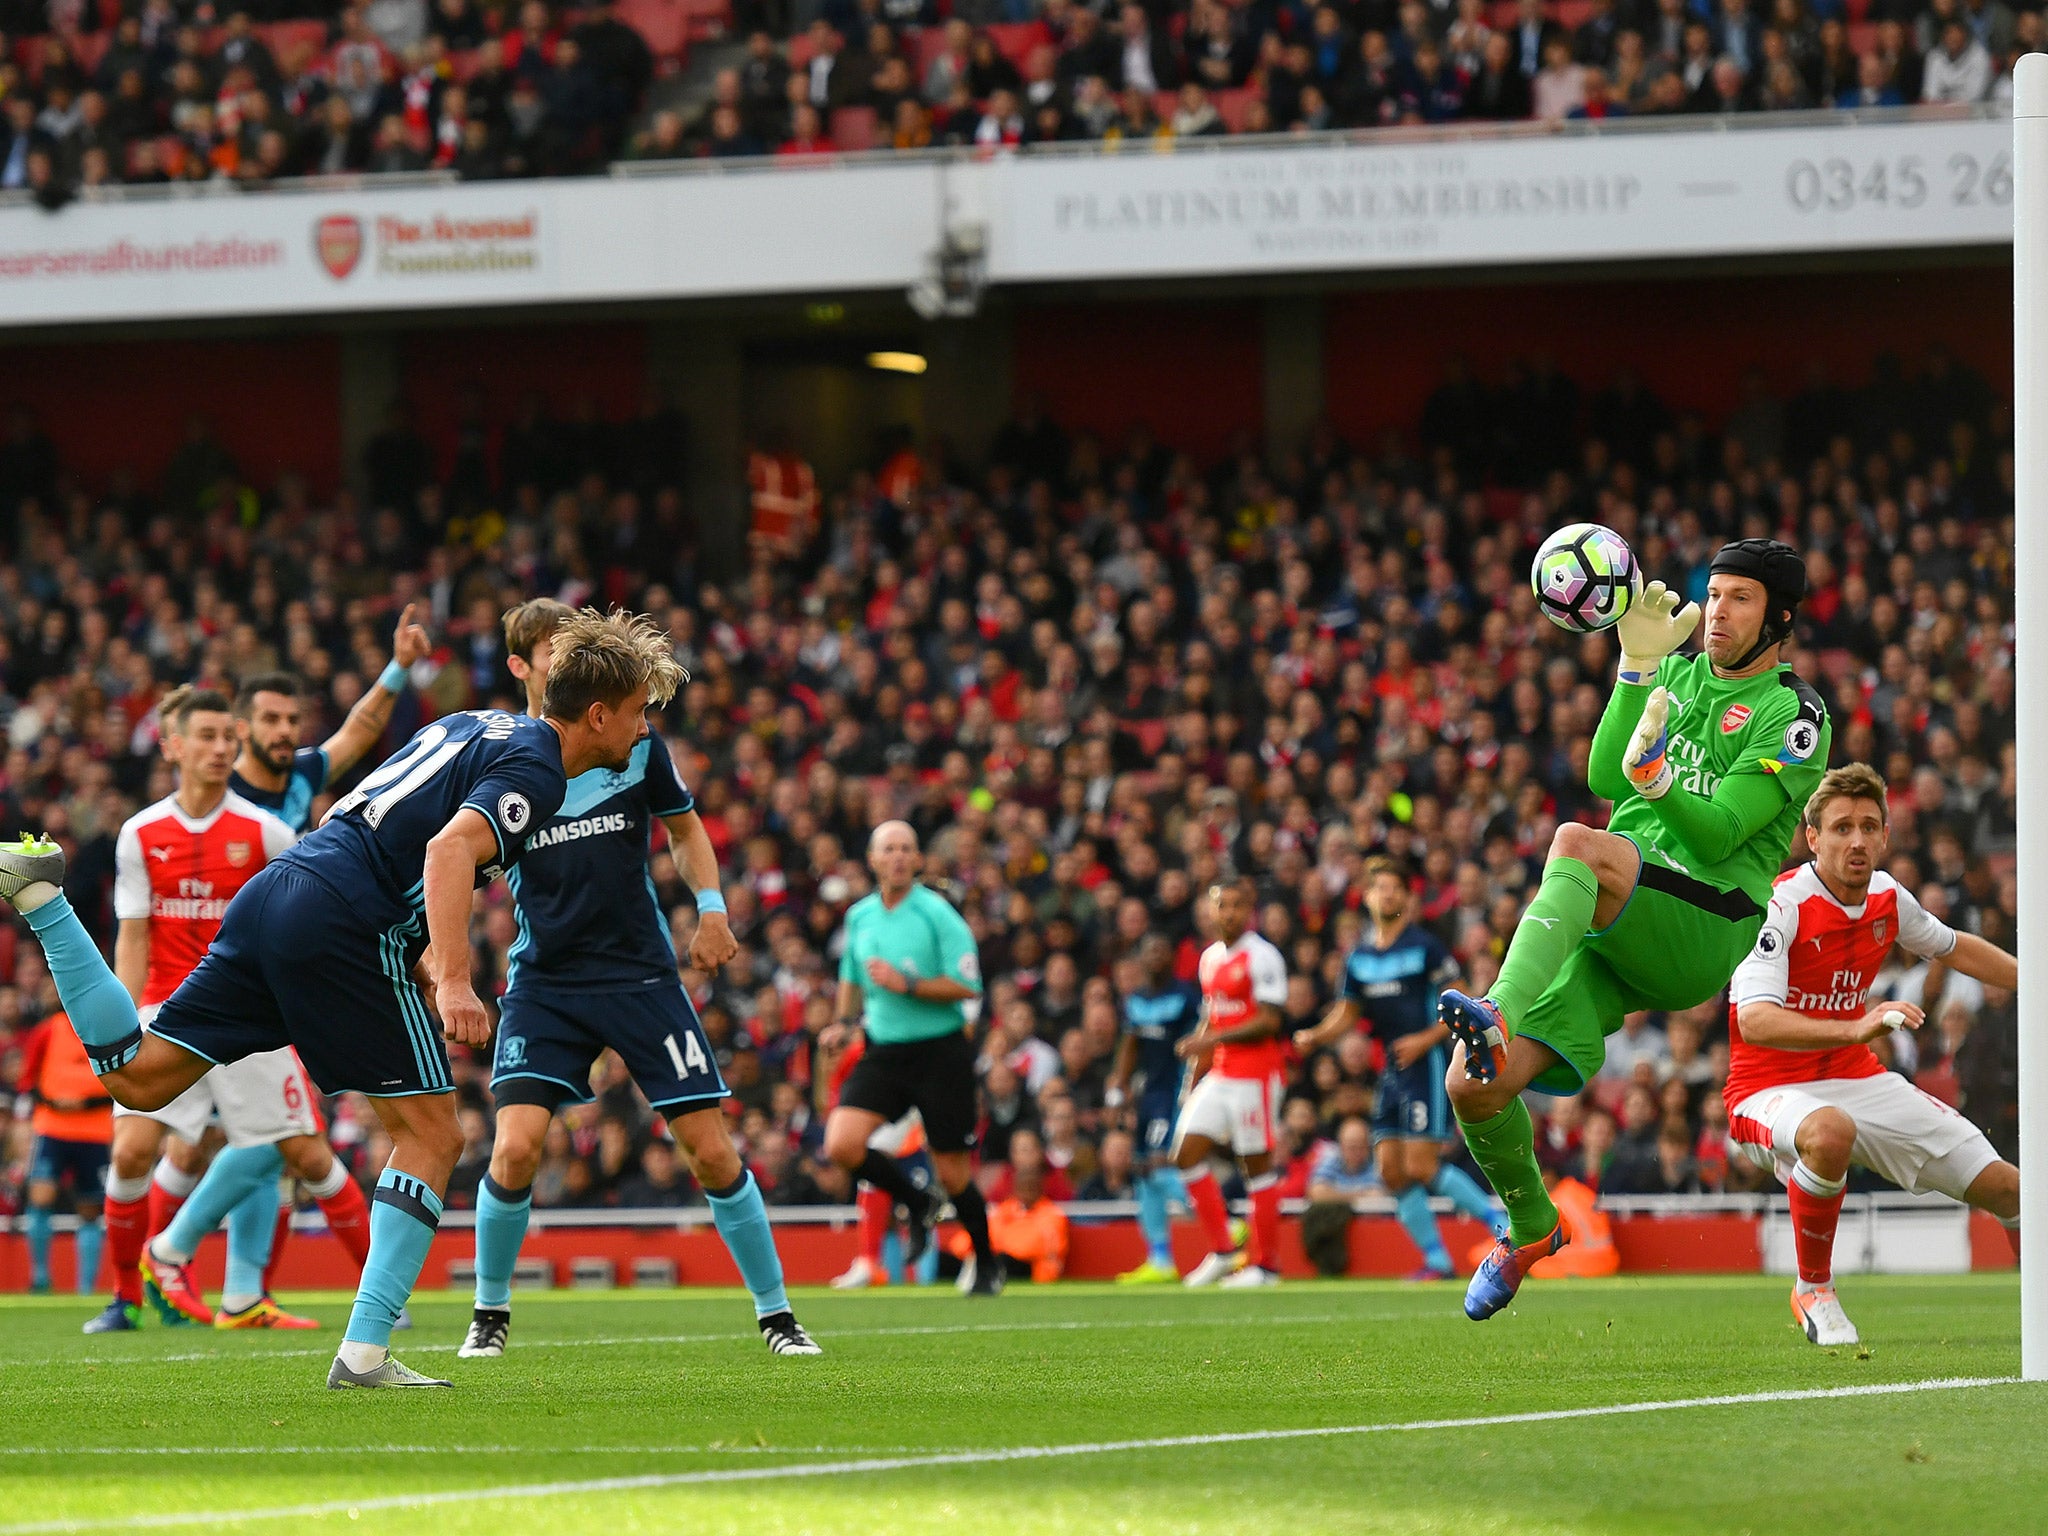 Petr Cech saved Arsenal a point in the 0-0 draw with Middlesbrough